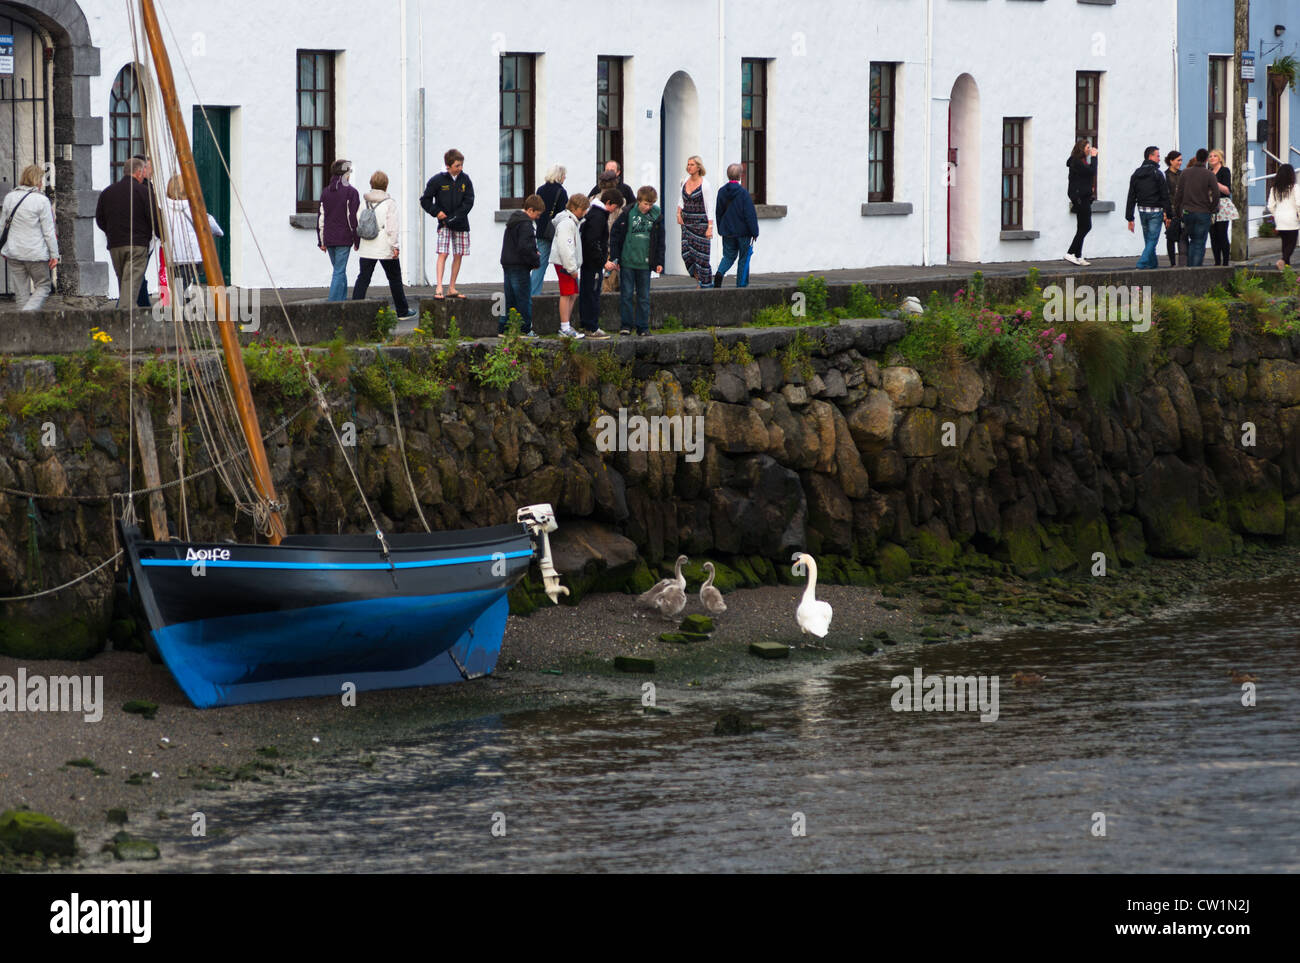 The Long walk on banks of river Corrib, Galway City, County Galway, Ireland. Stock Photo